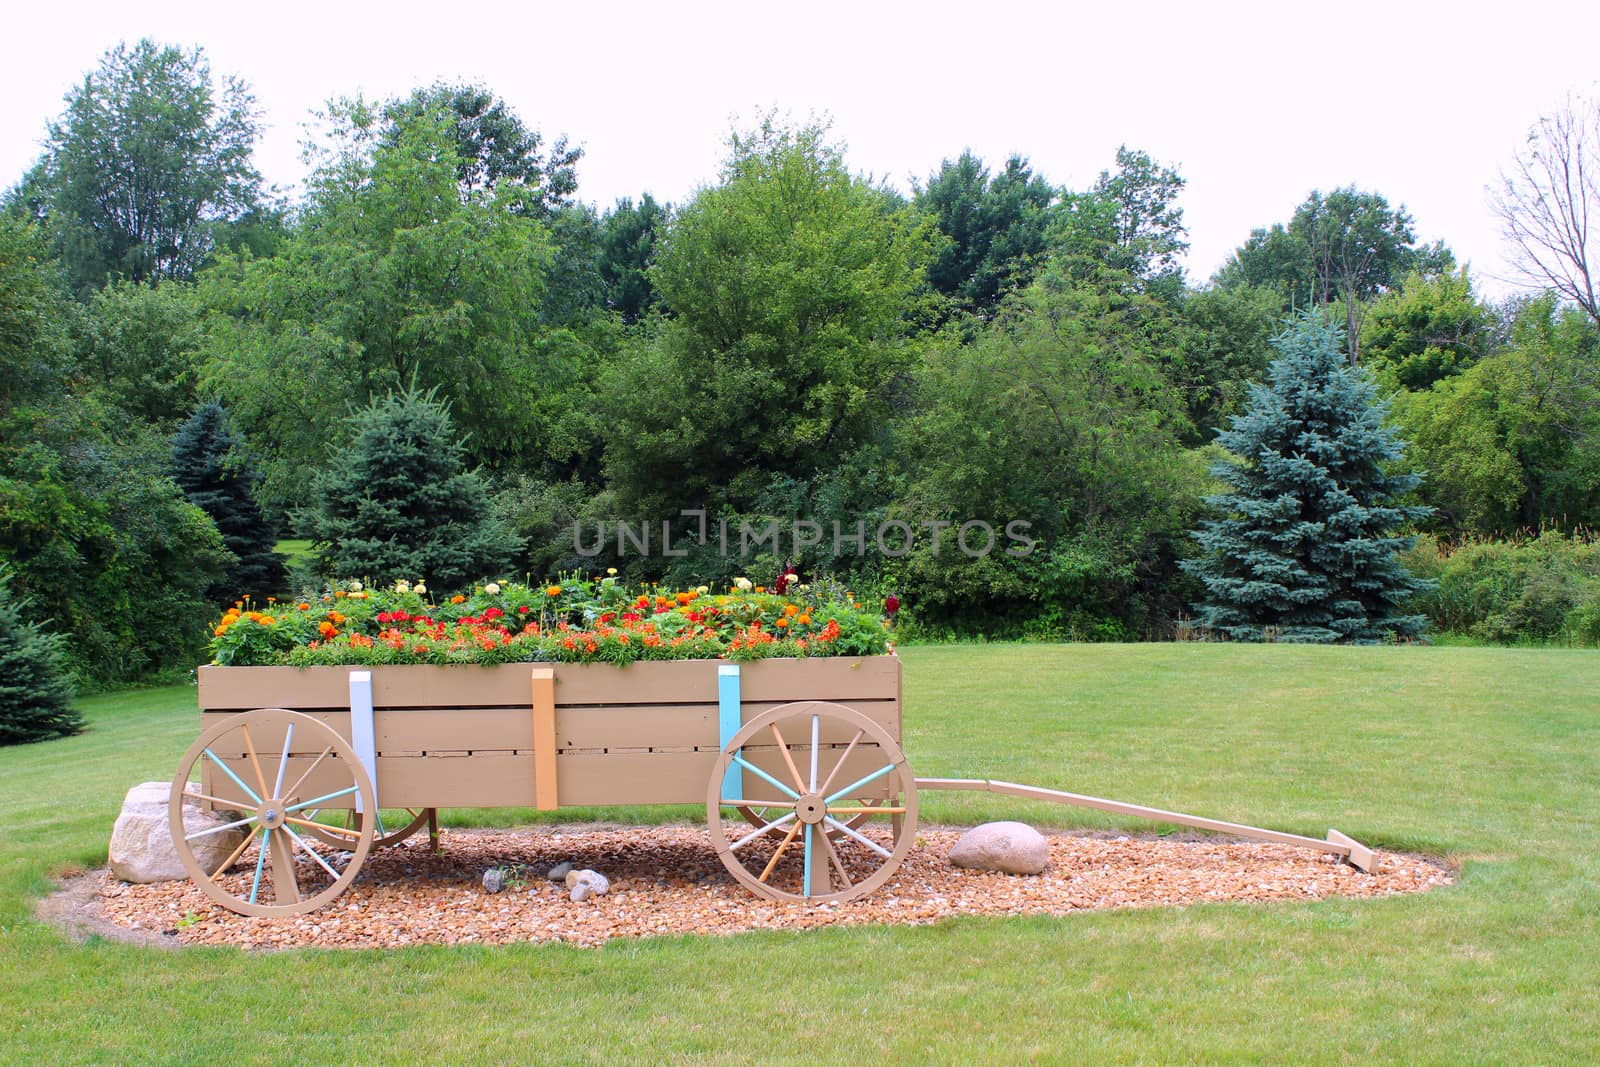 A wagon filled with flowers makes a nice addition to a garden area bordered by evergreen trees.